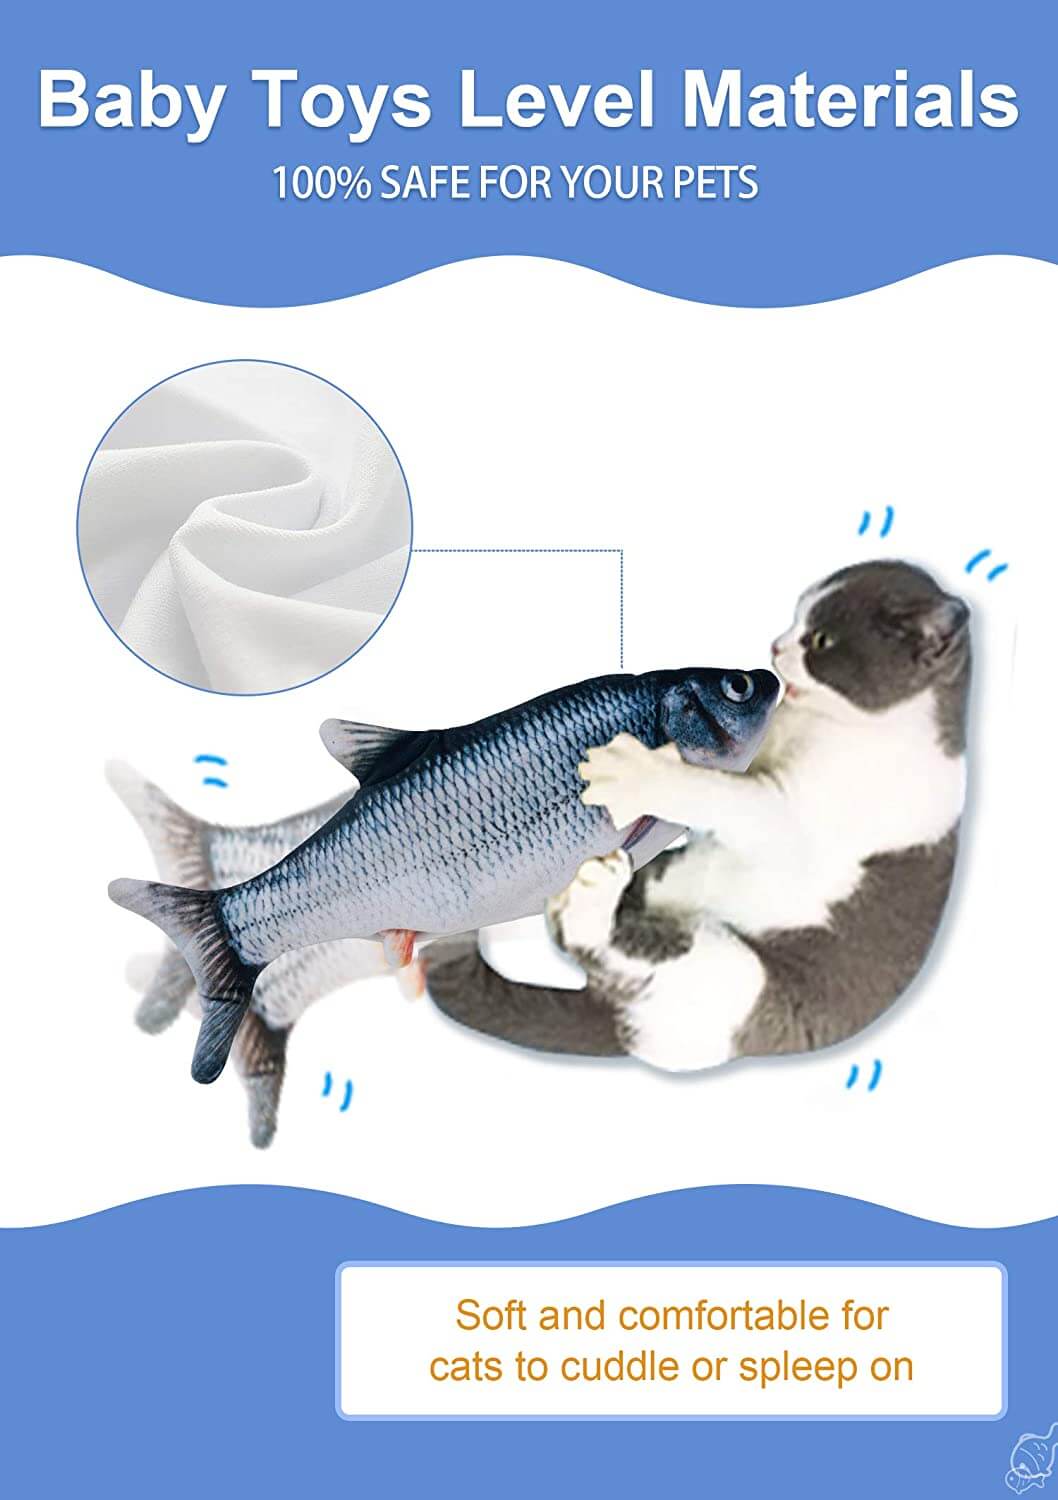 Moving Cat Kicker Fish Toy/Features